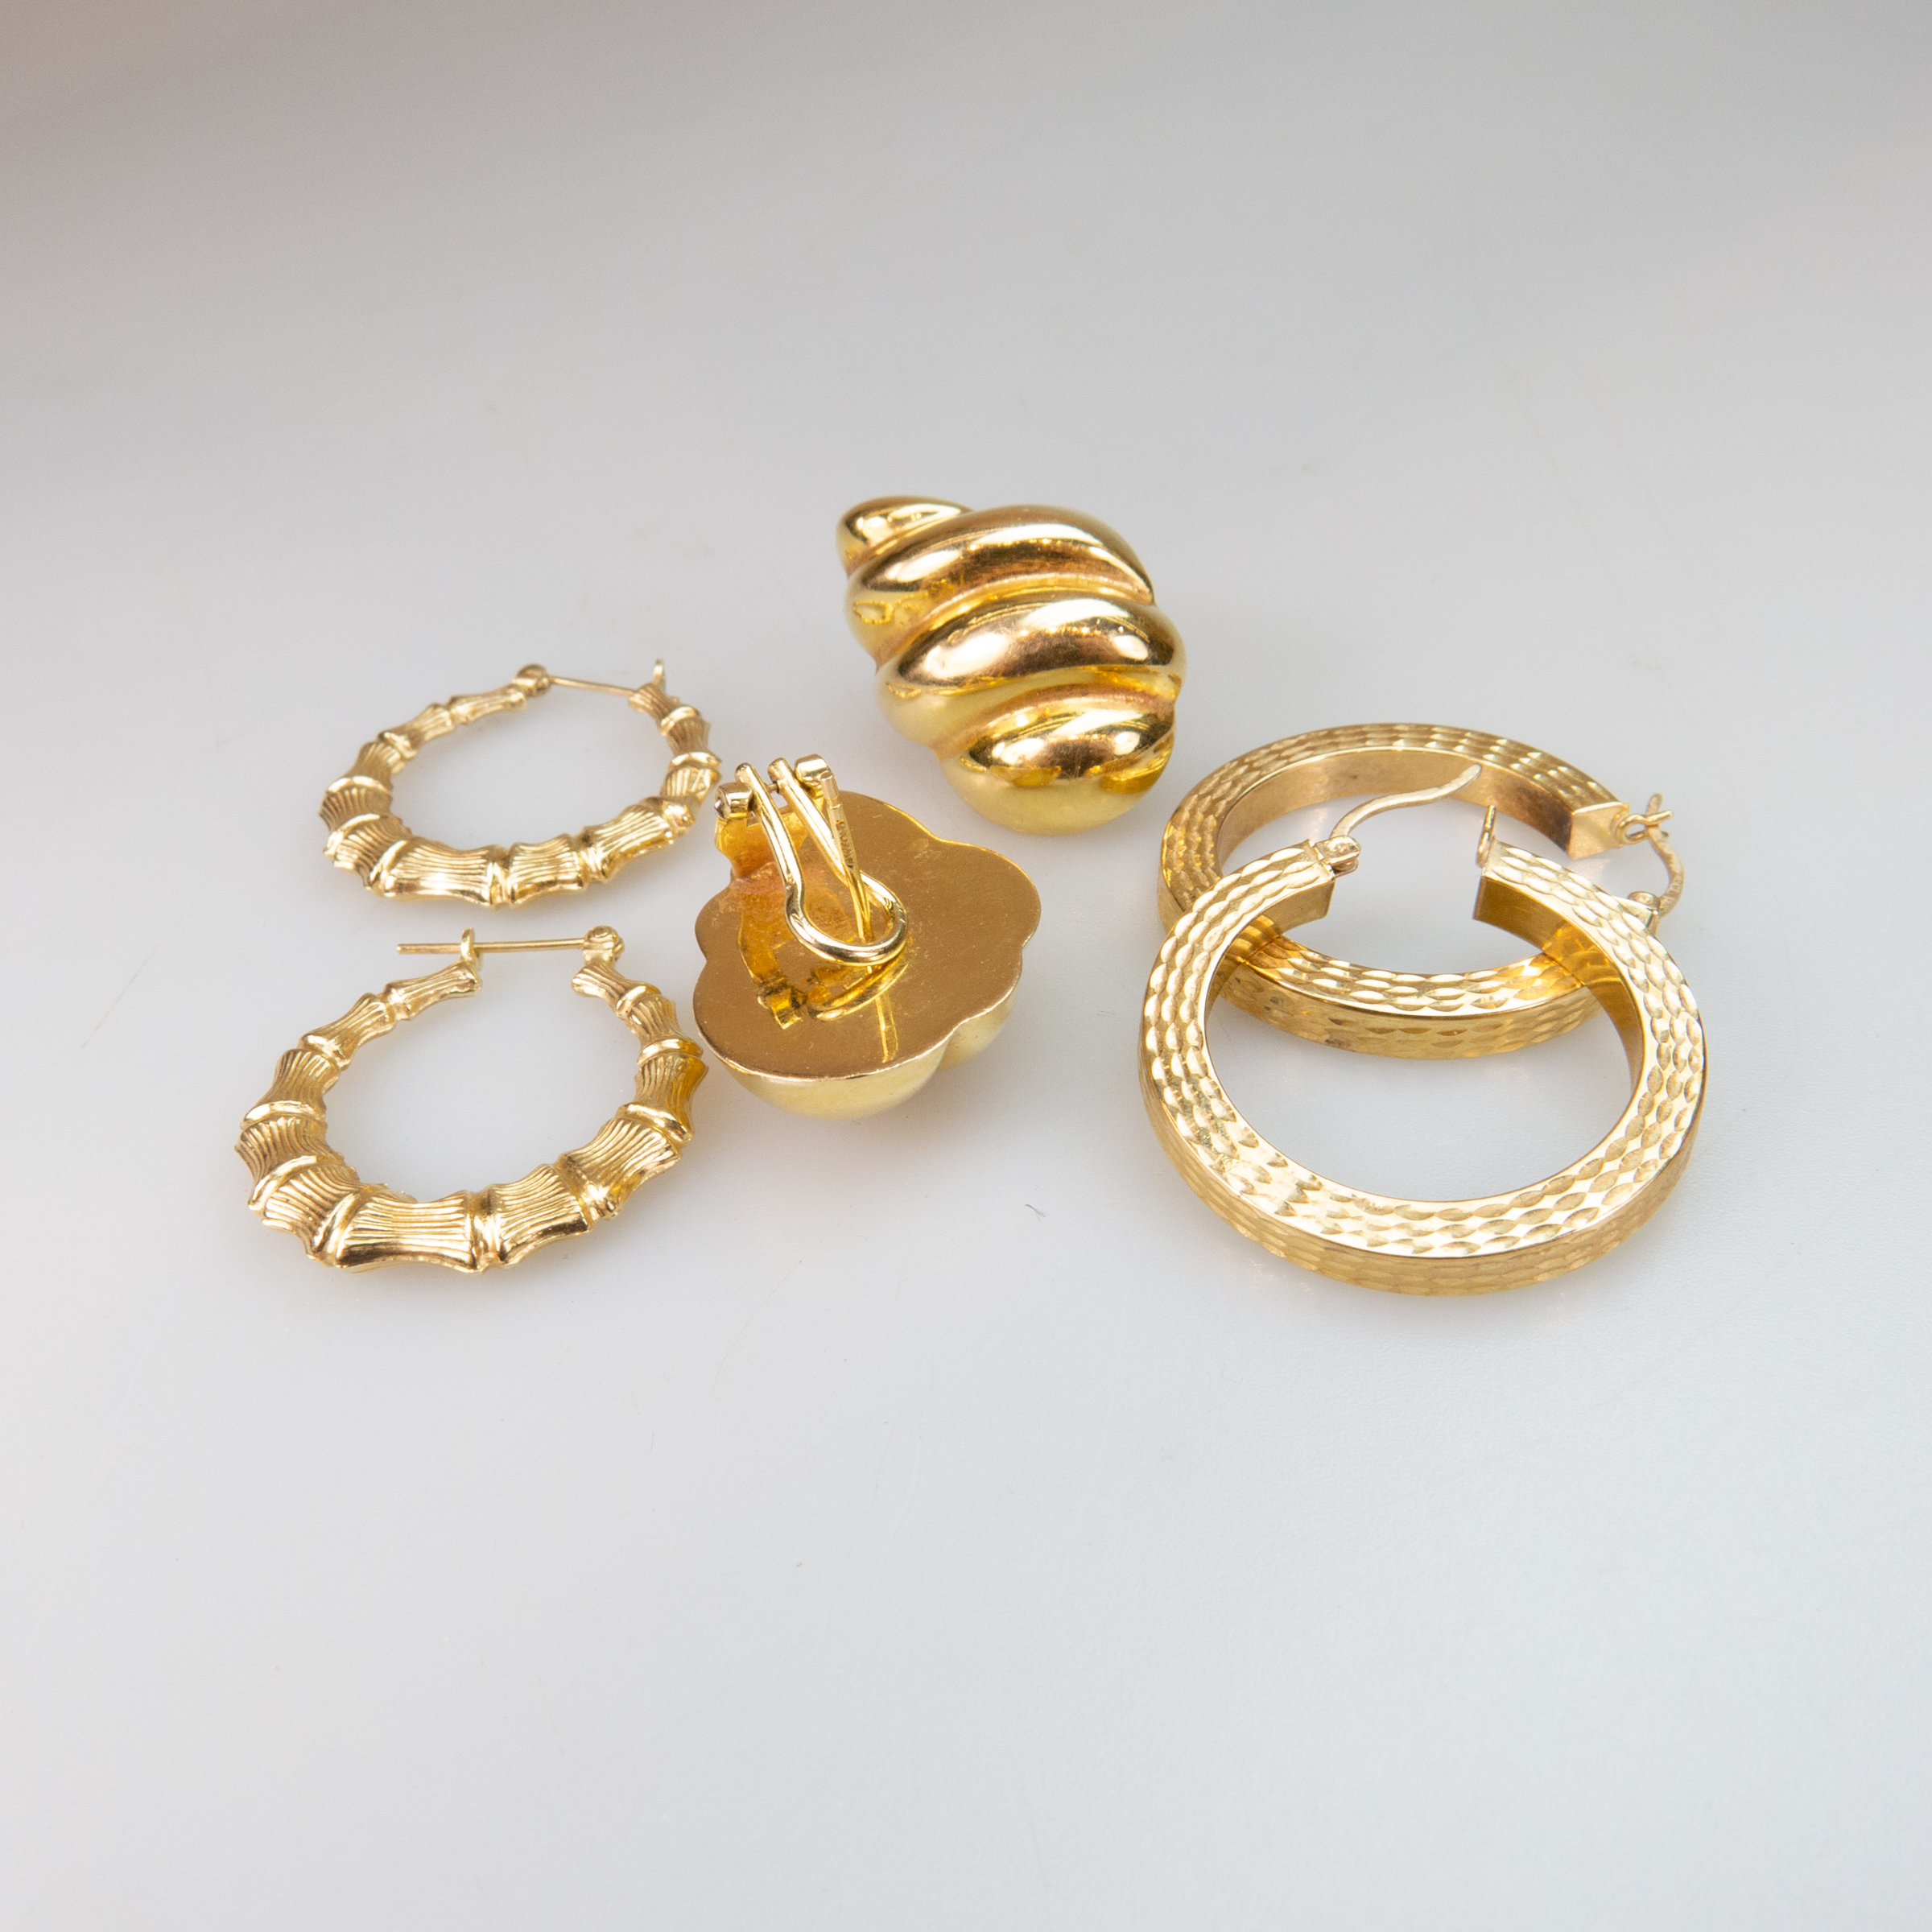 3 Pairs Of 14k Yellow Gold Earrings